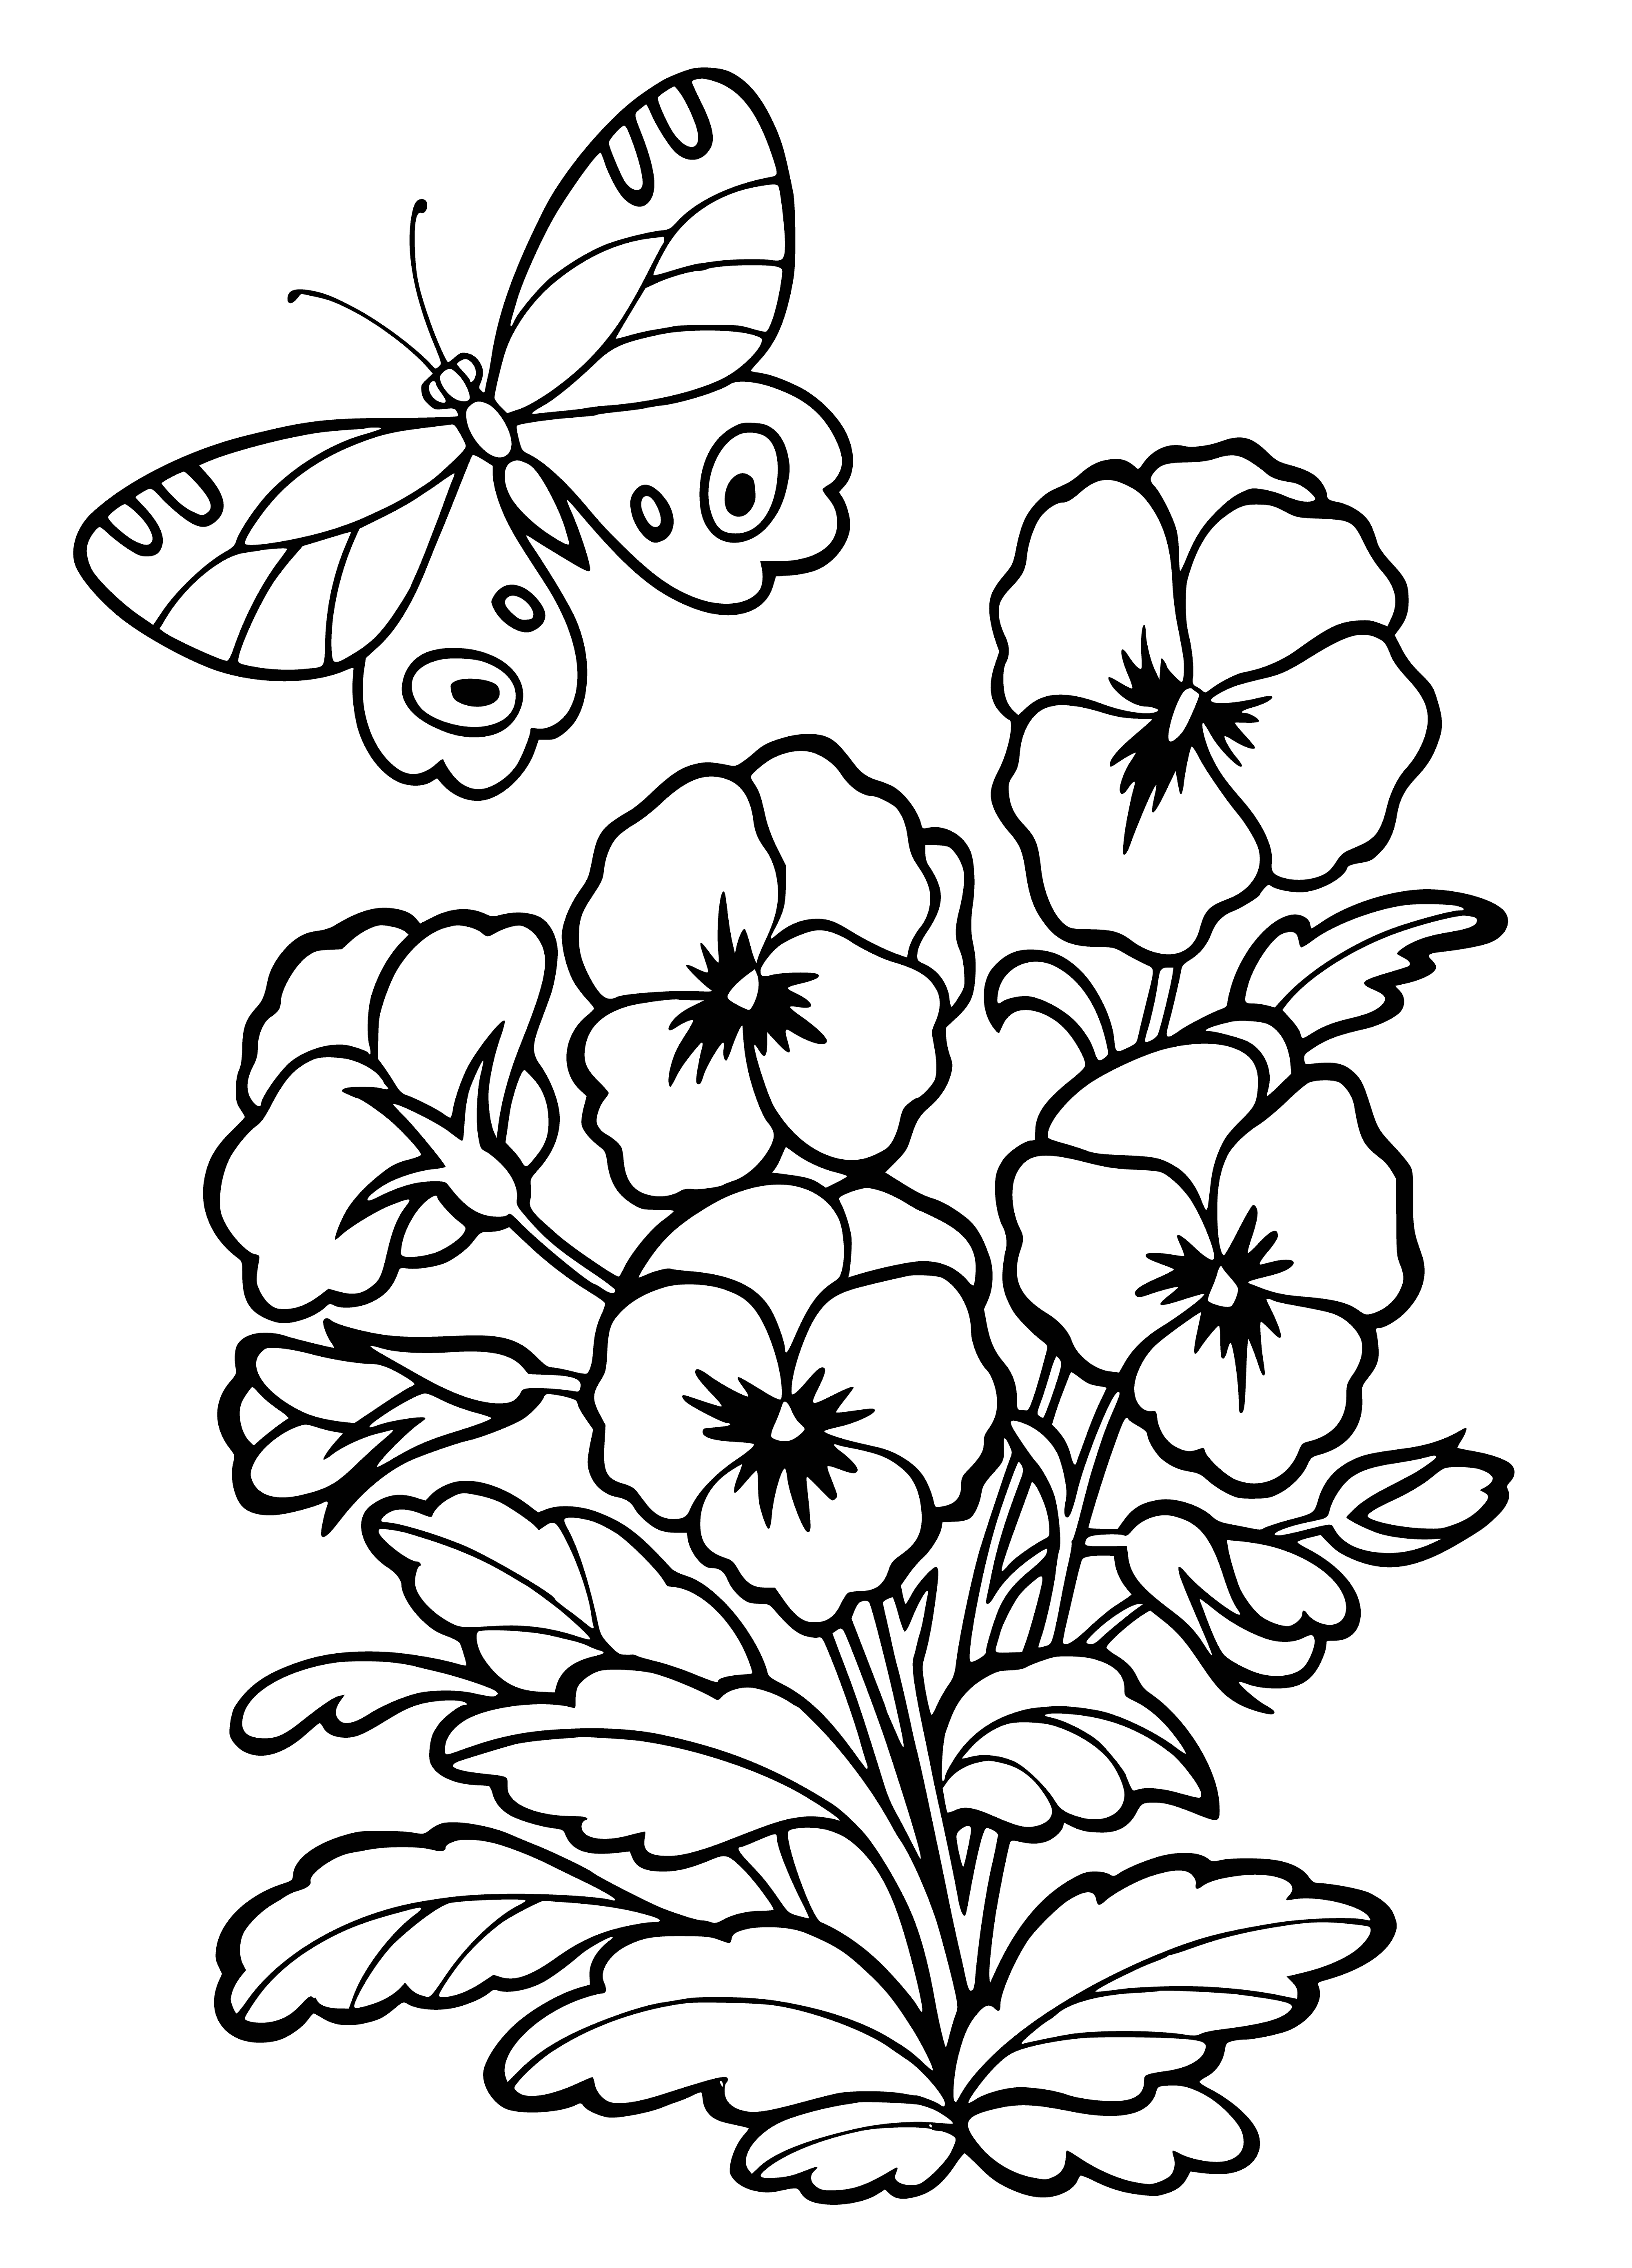 coloring page: Six flowers in pot - 3 yellow w/ green stems & 3 purple w/ brown stems. Black spots on faces, heart-shaped green leaves.